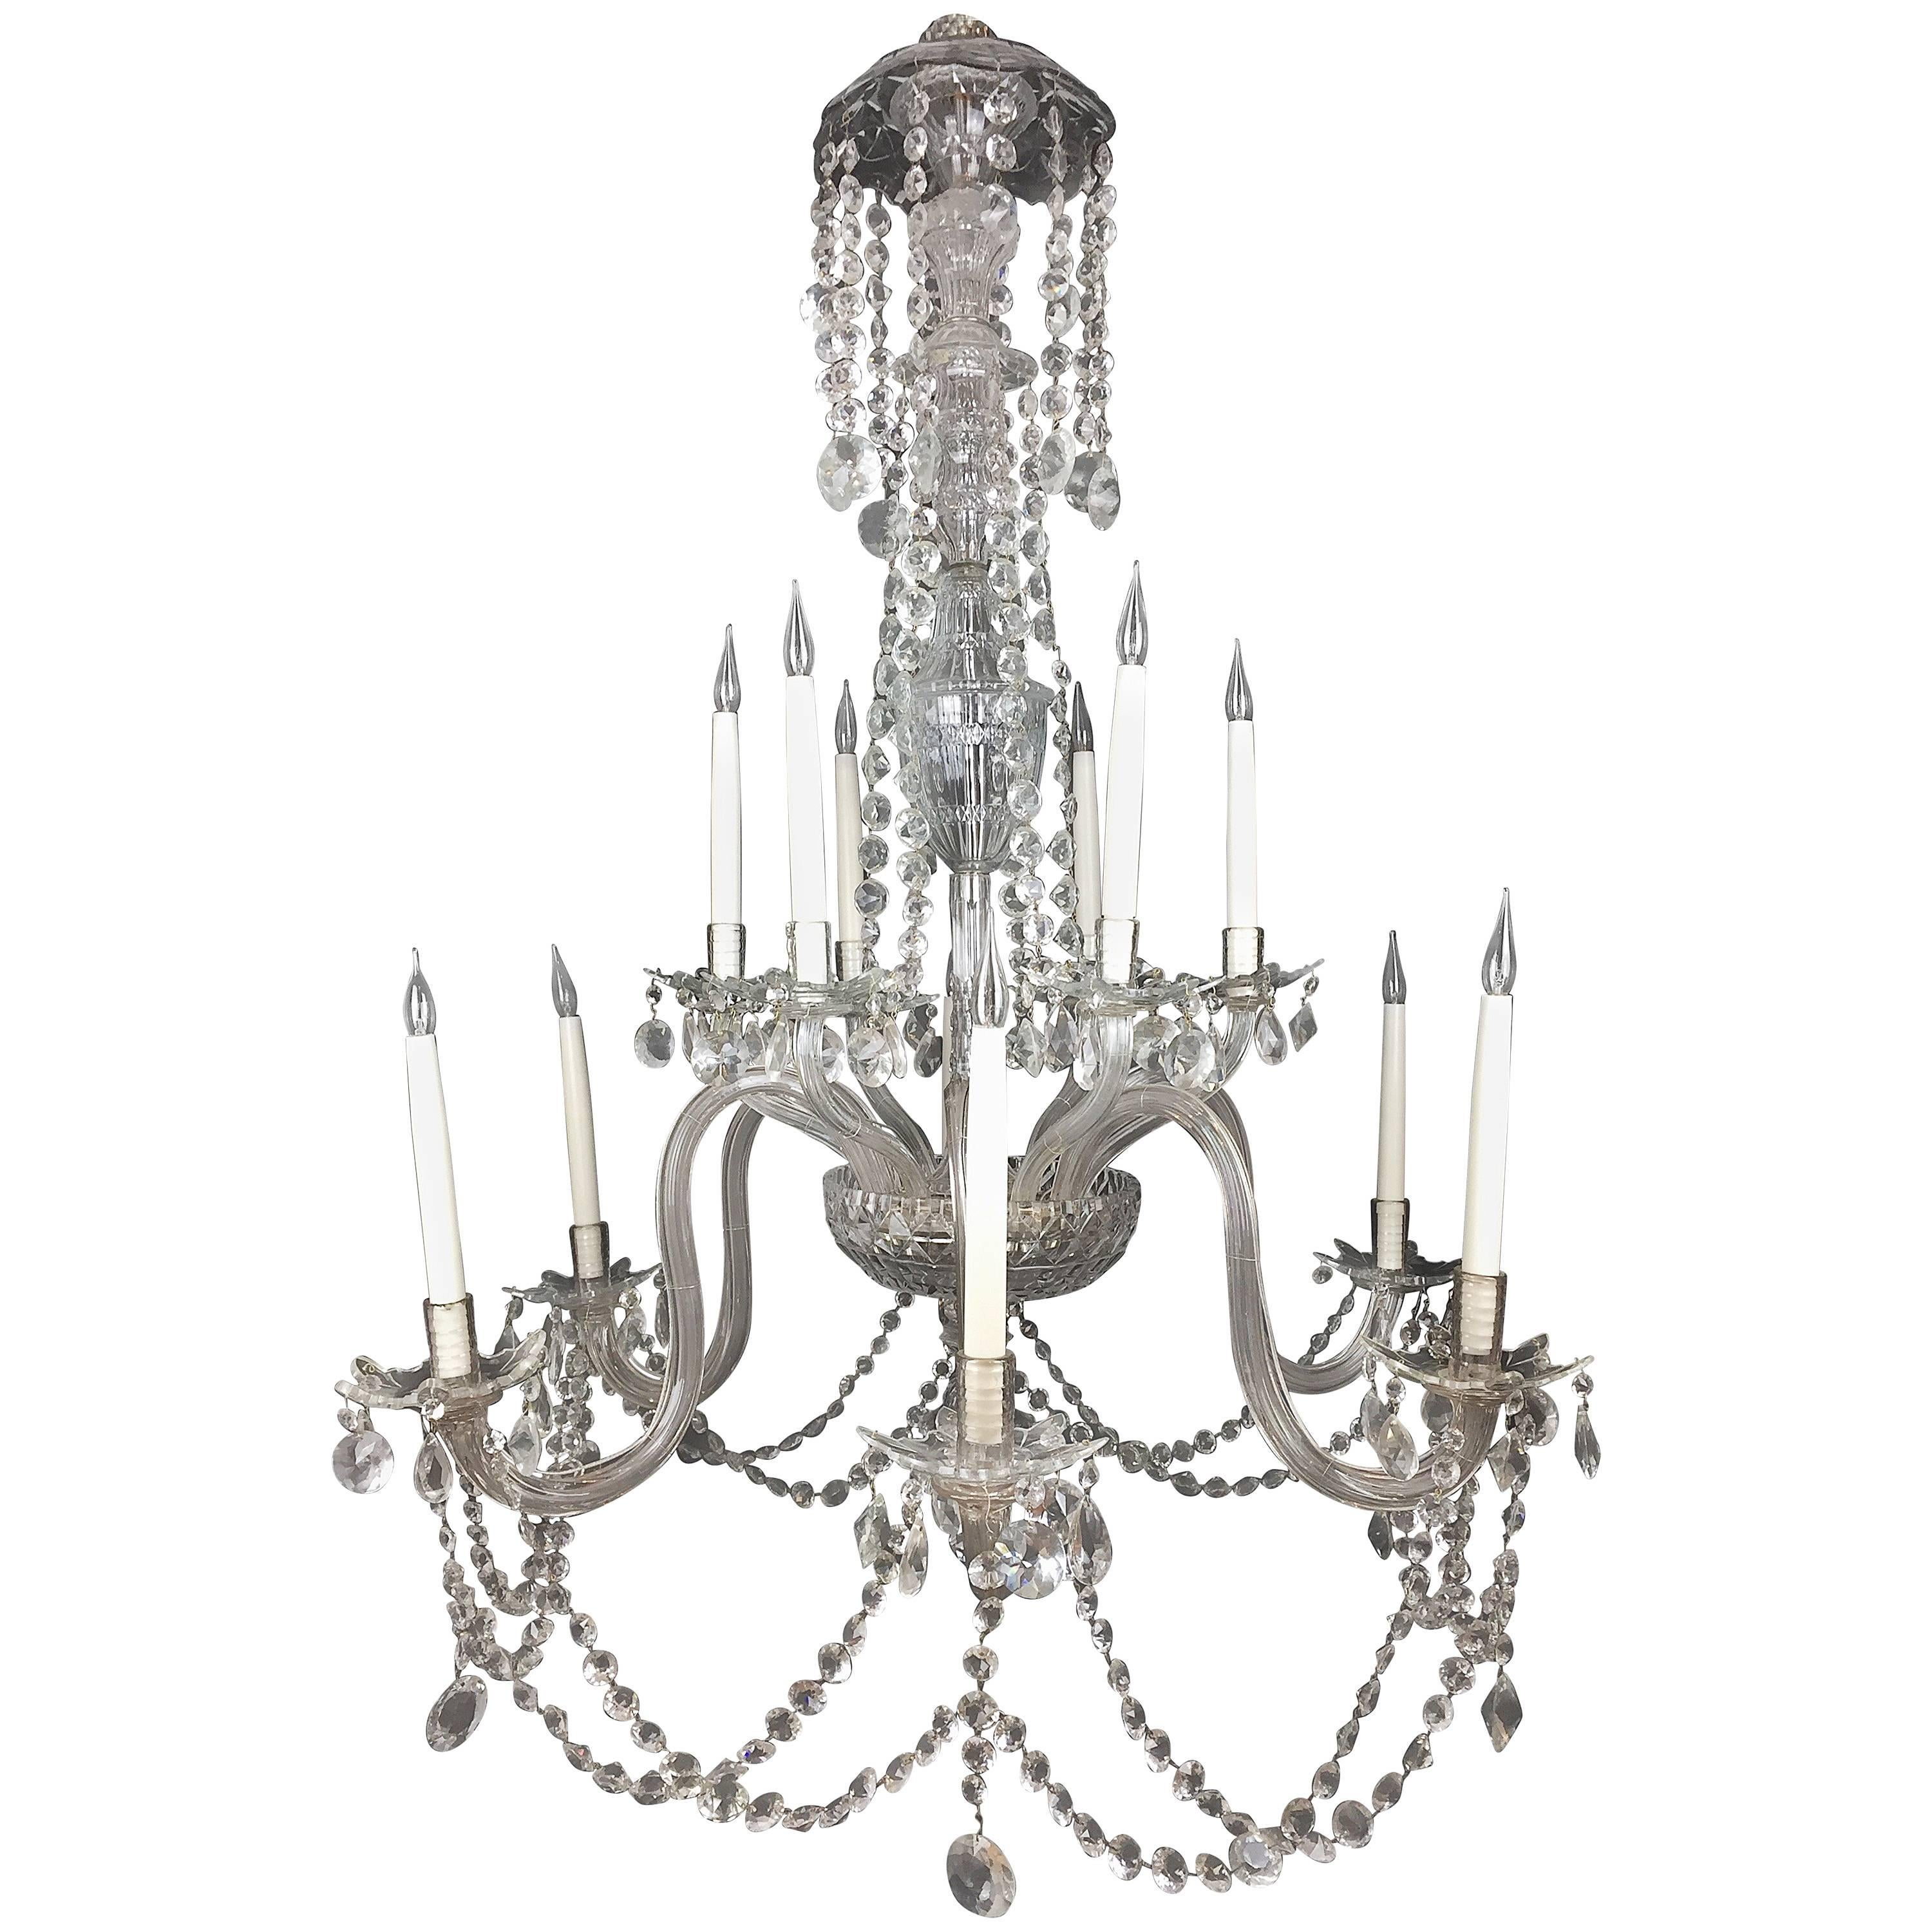 Early English 19th Century Six-Arm Chandelier For Sale